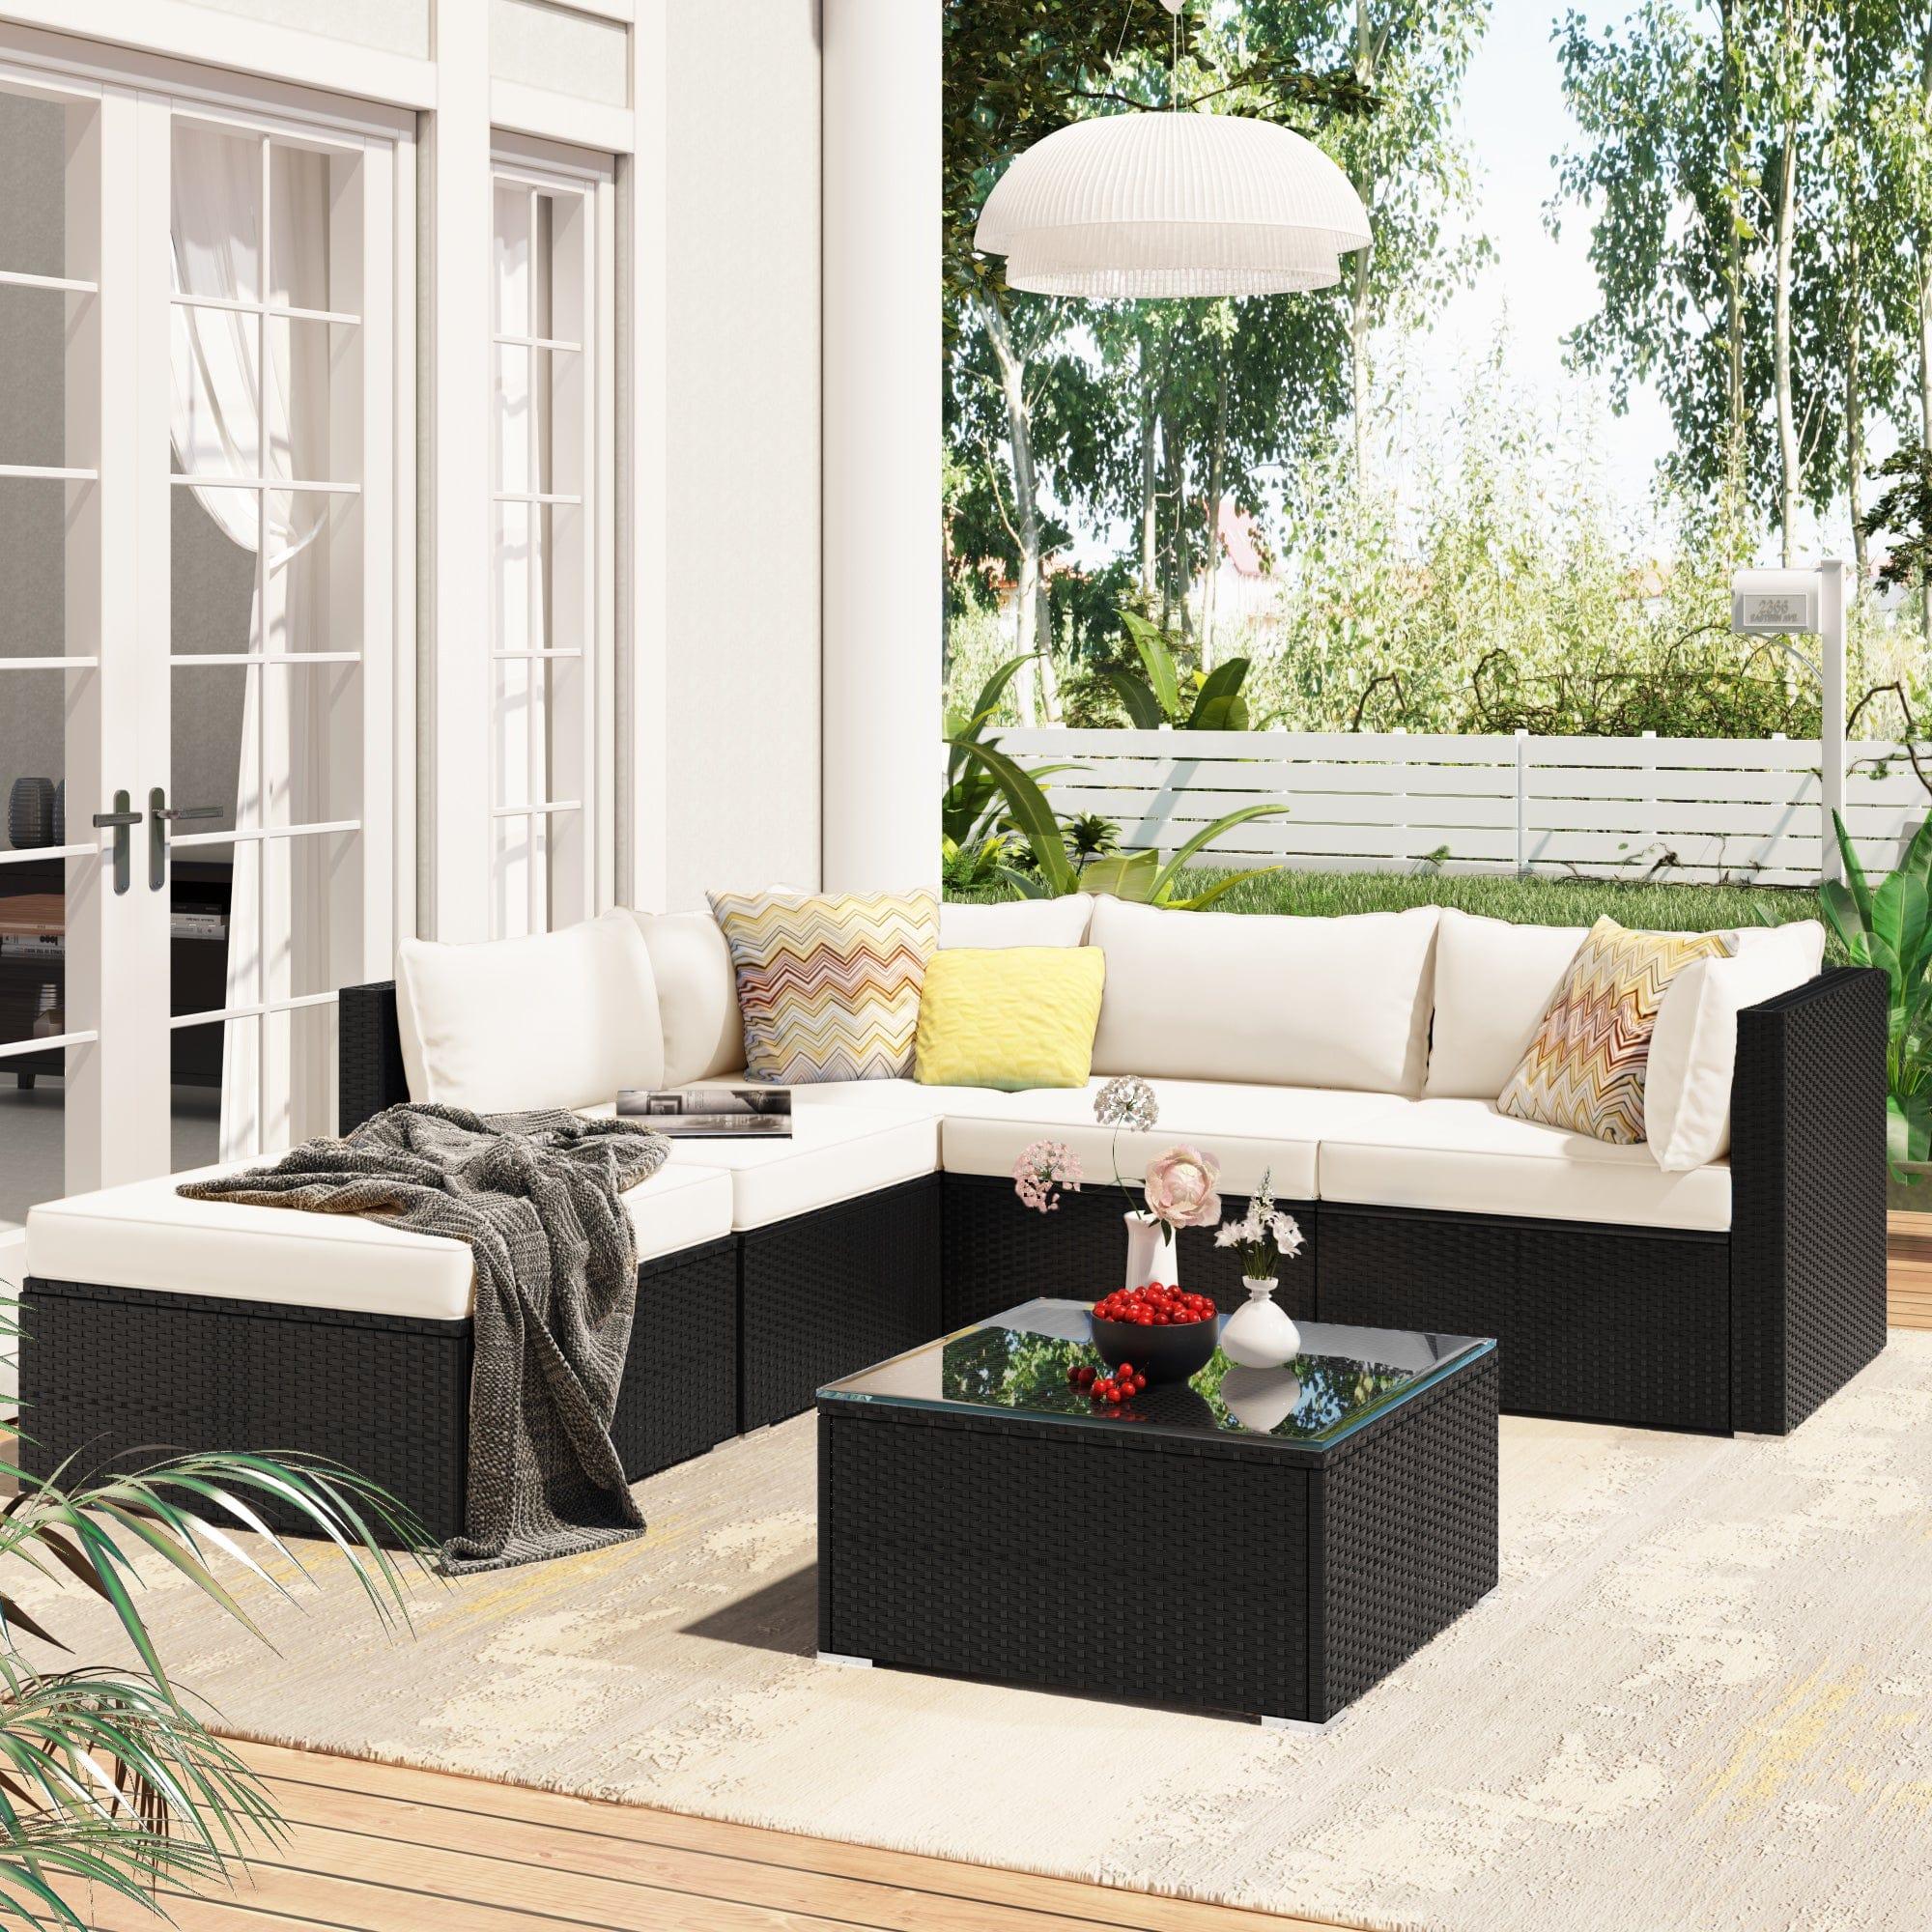 Shop GO 6-Piece Patio Furniture Set corner sofa set with thick removable cushions, PE Rattan Wicker, outdoor Garden Sectional Sofa Chair, removable Beige cushions, Black wicker Mademoiselle Home Decor